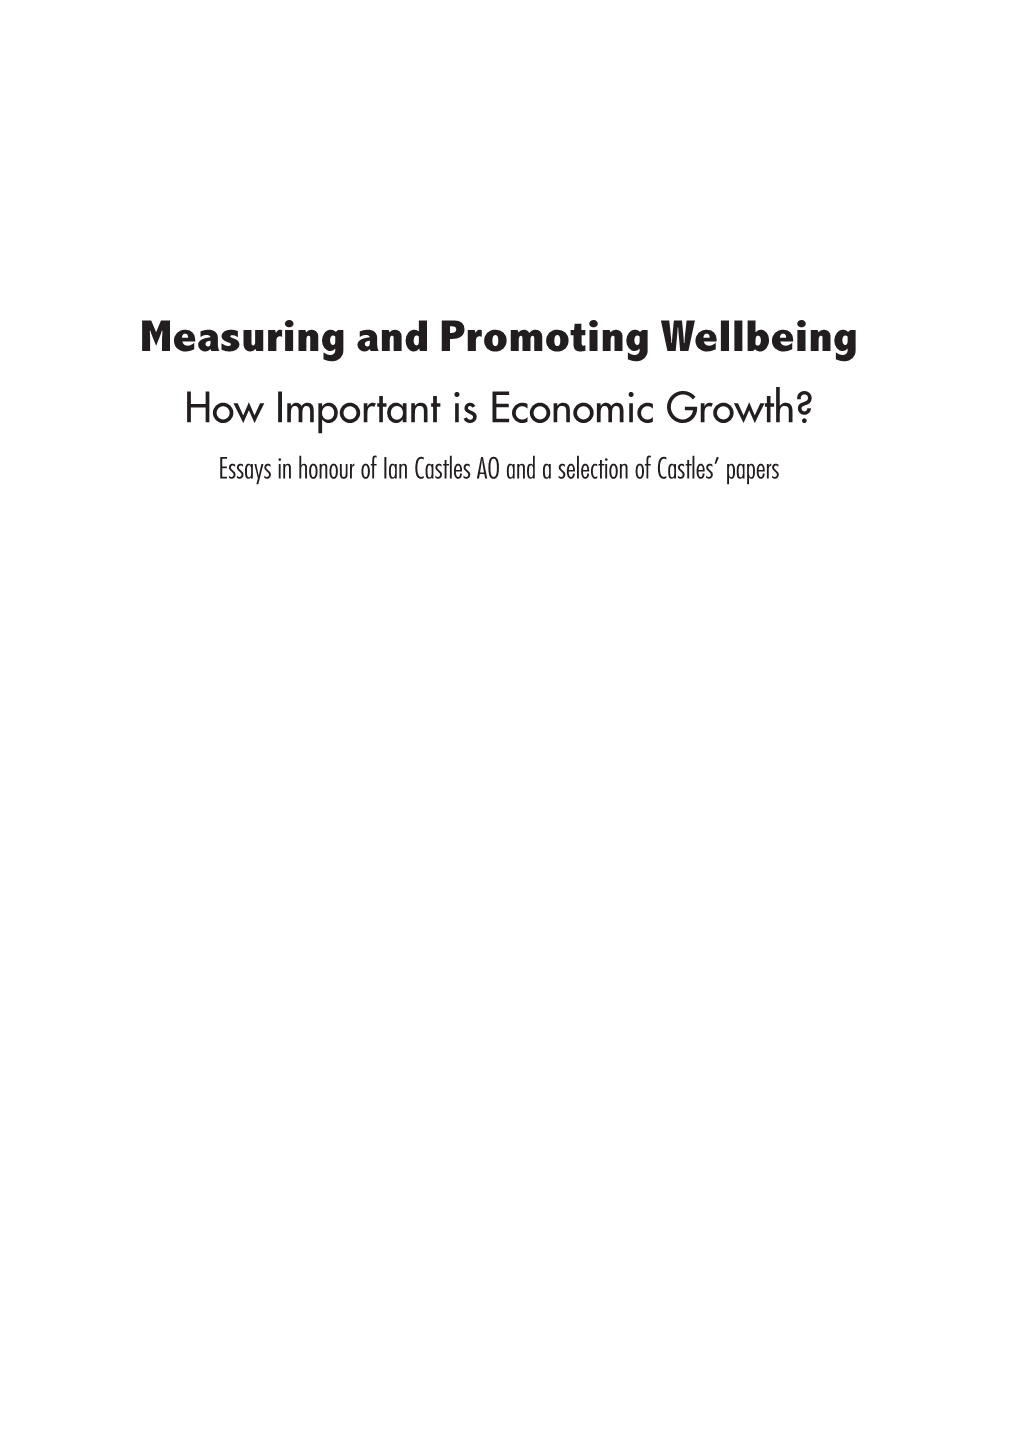 Measuring and Promoting Wellbeing How Important Is Economic Growth? Essays in Honour of Ian Castles AO and a Selection of Castles’ Papers